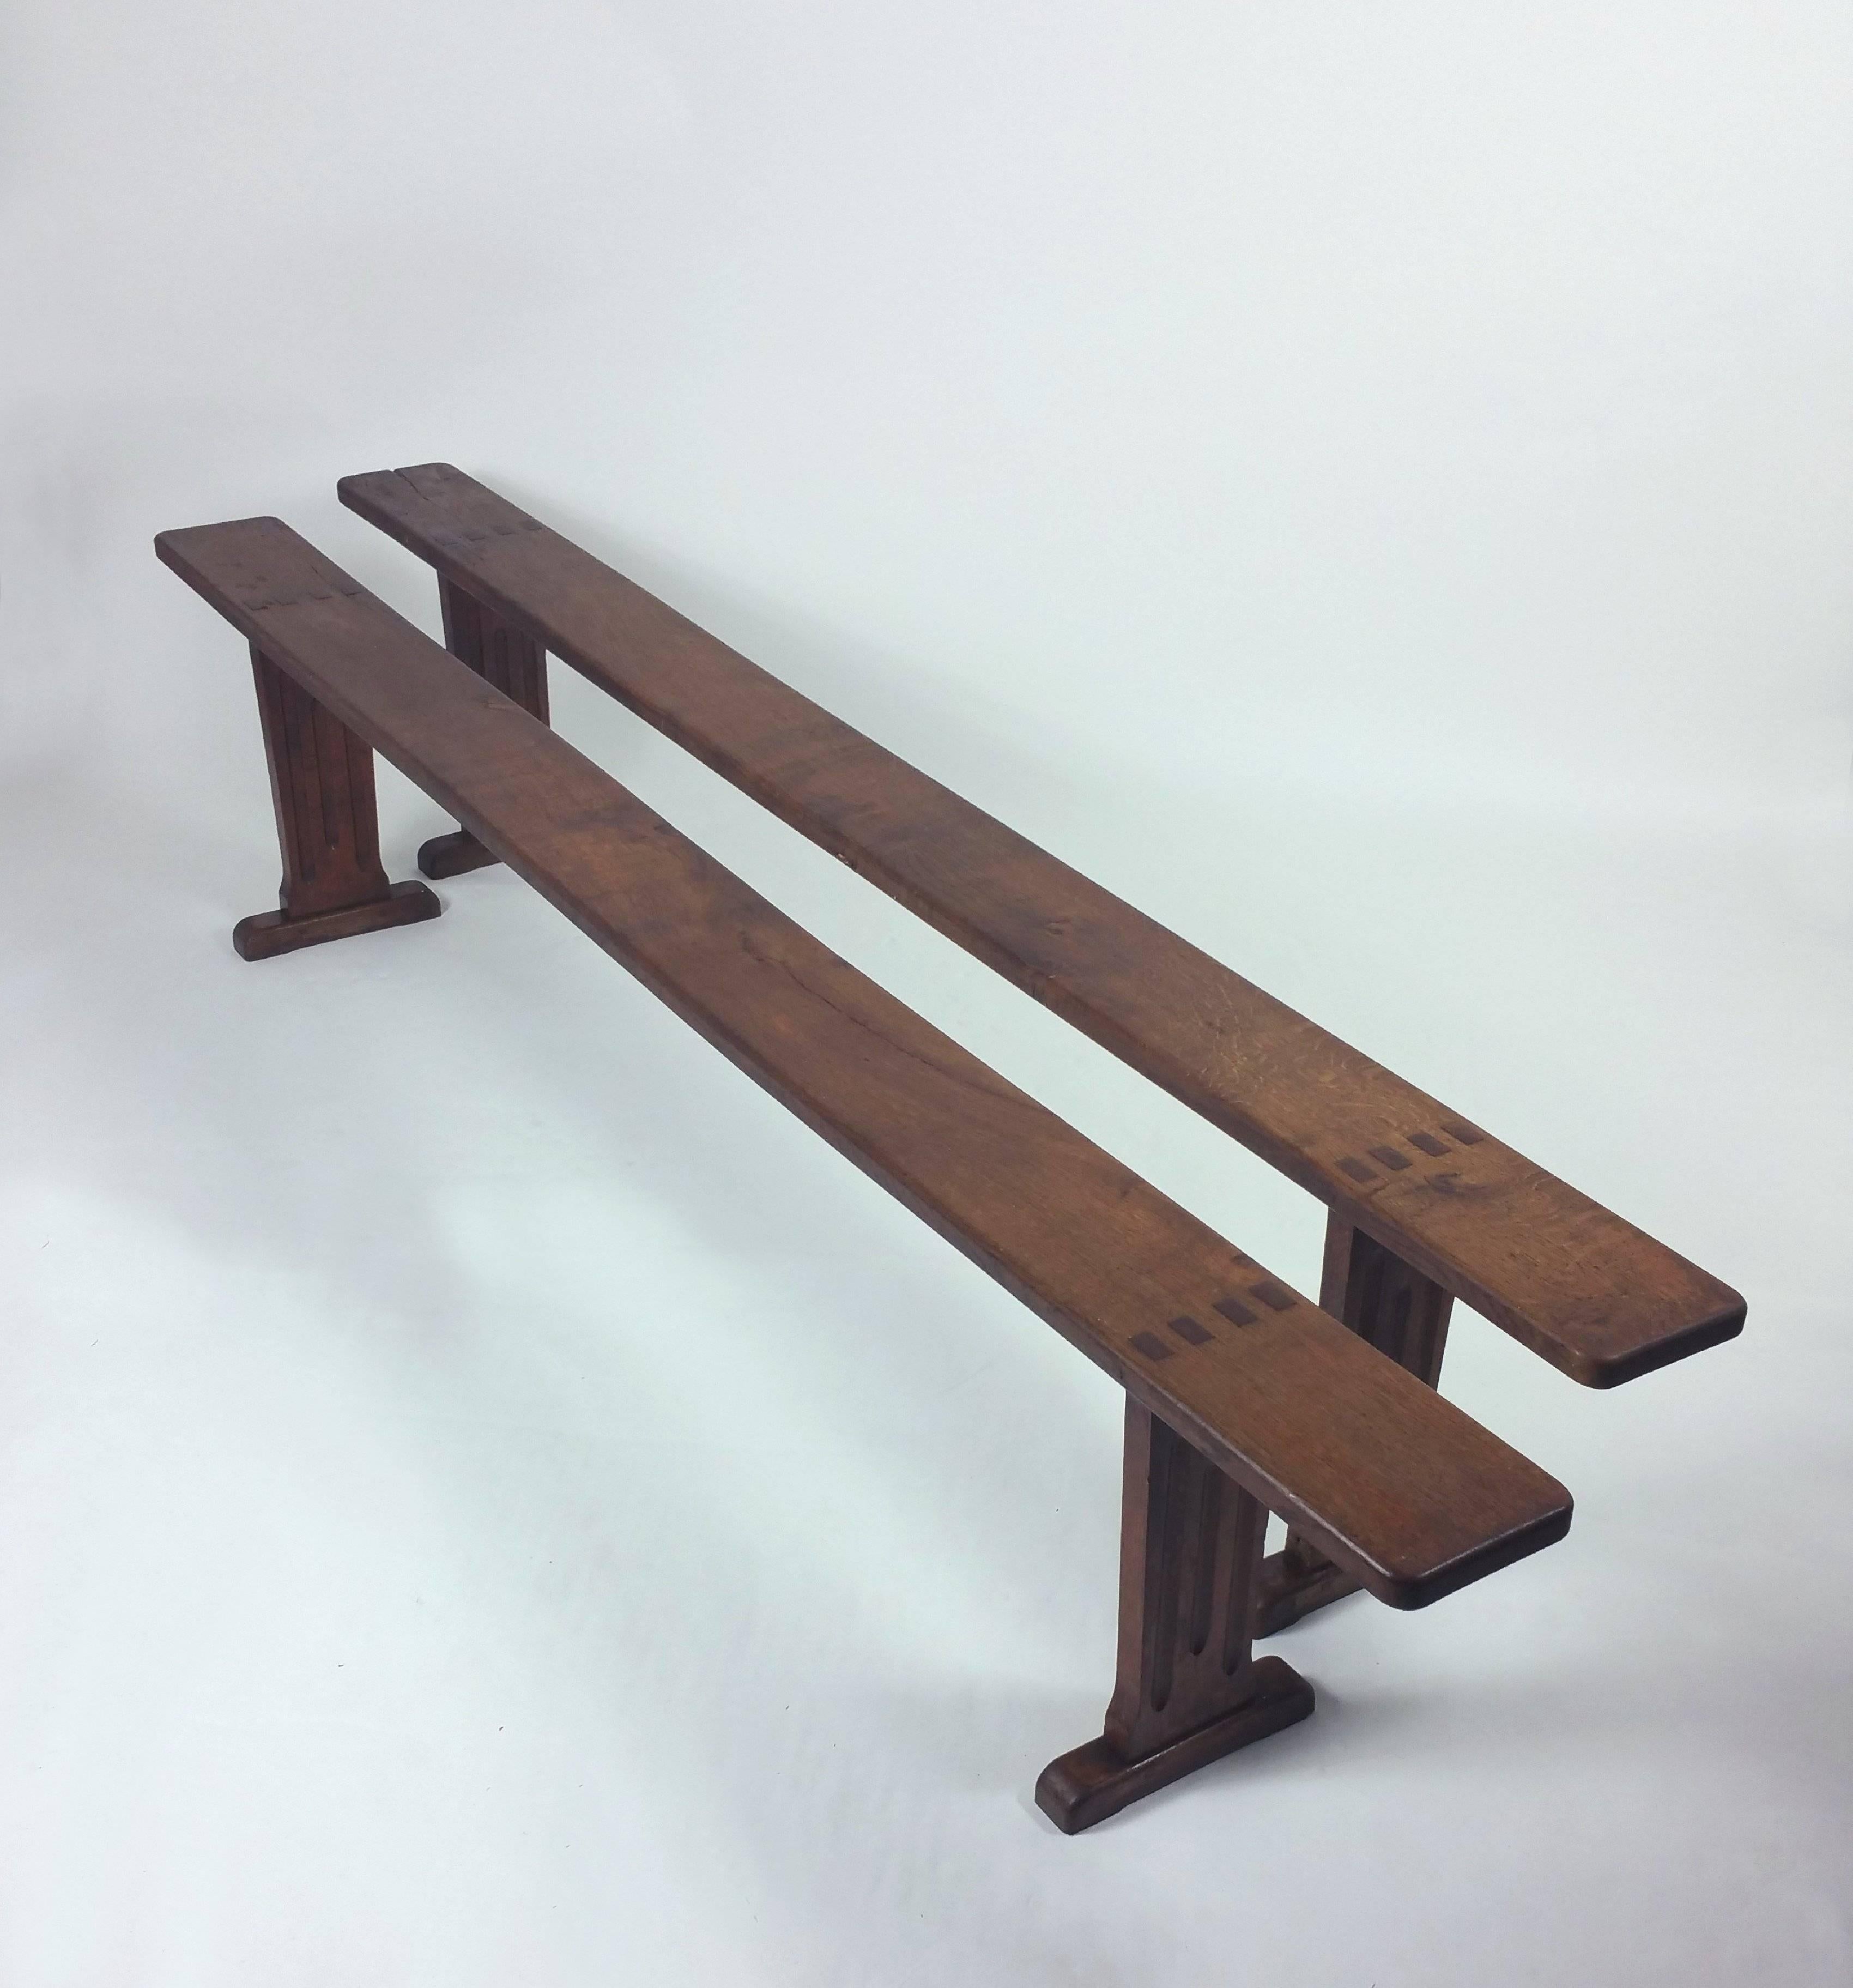 These wonderful and rustic oak form benches has fluted trestle ends and a gorgeous warm and rich patina. Each one measures 98 in – 249 cm long, 7 in – 17.8 cm deep and 18 ½ in – 47 cm in height. They have bags of character and would make a fantastic